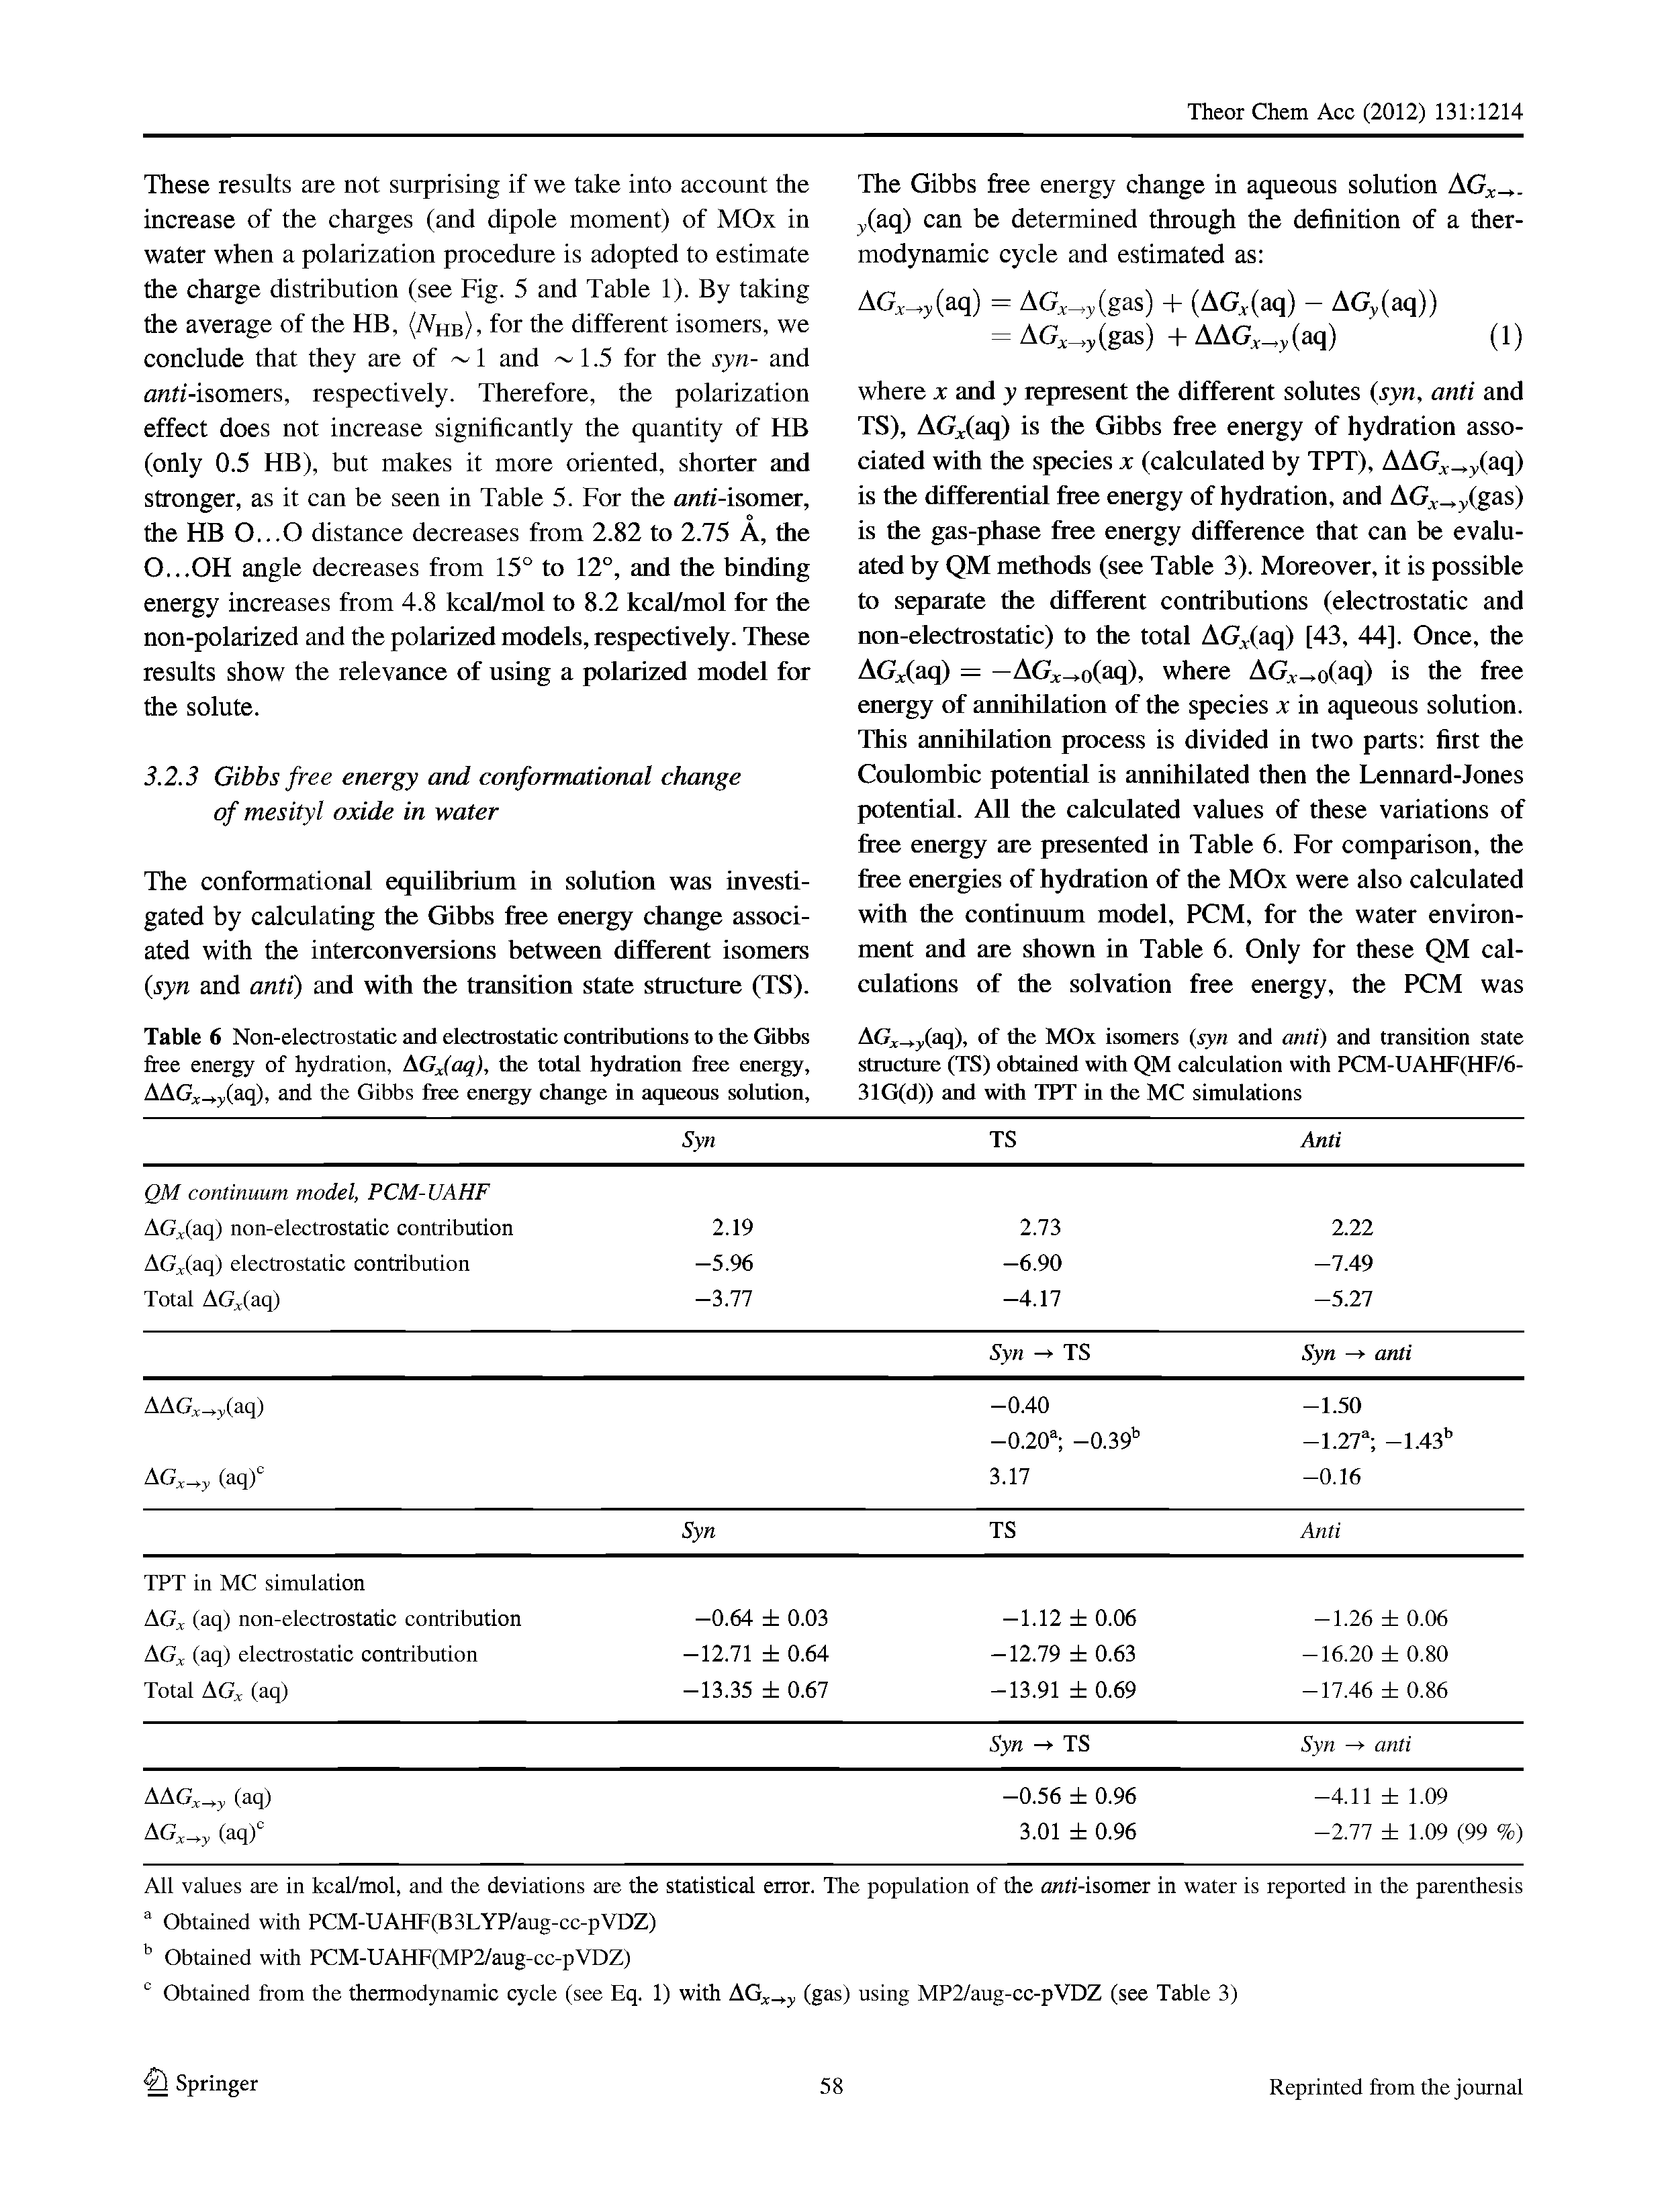 Table 6 Non-electrostatic and electrostatic contributions to the Gibbs free energy of hydration, Gj[oq), the total hydration free energy, AAG c, v(aq), and the Gibbs free energy change in aqueous solution.